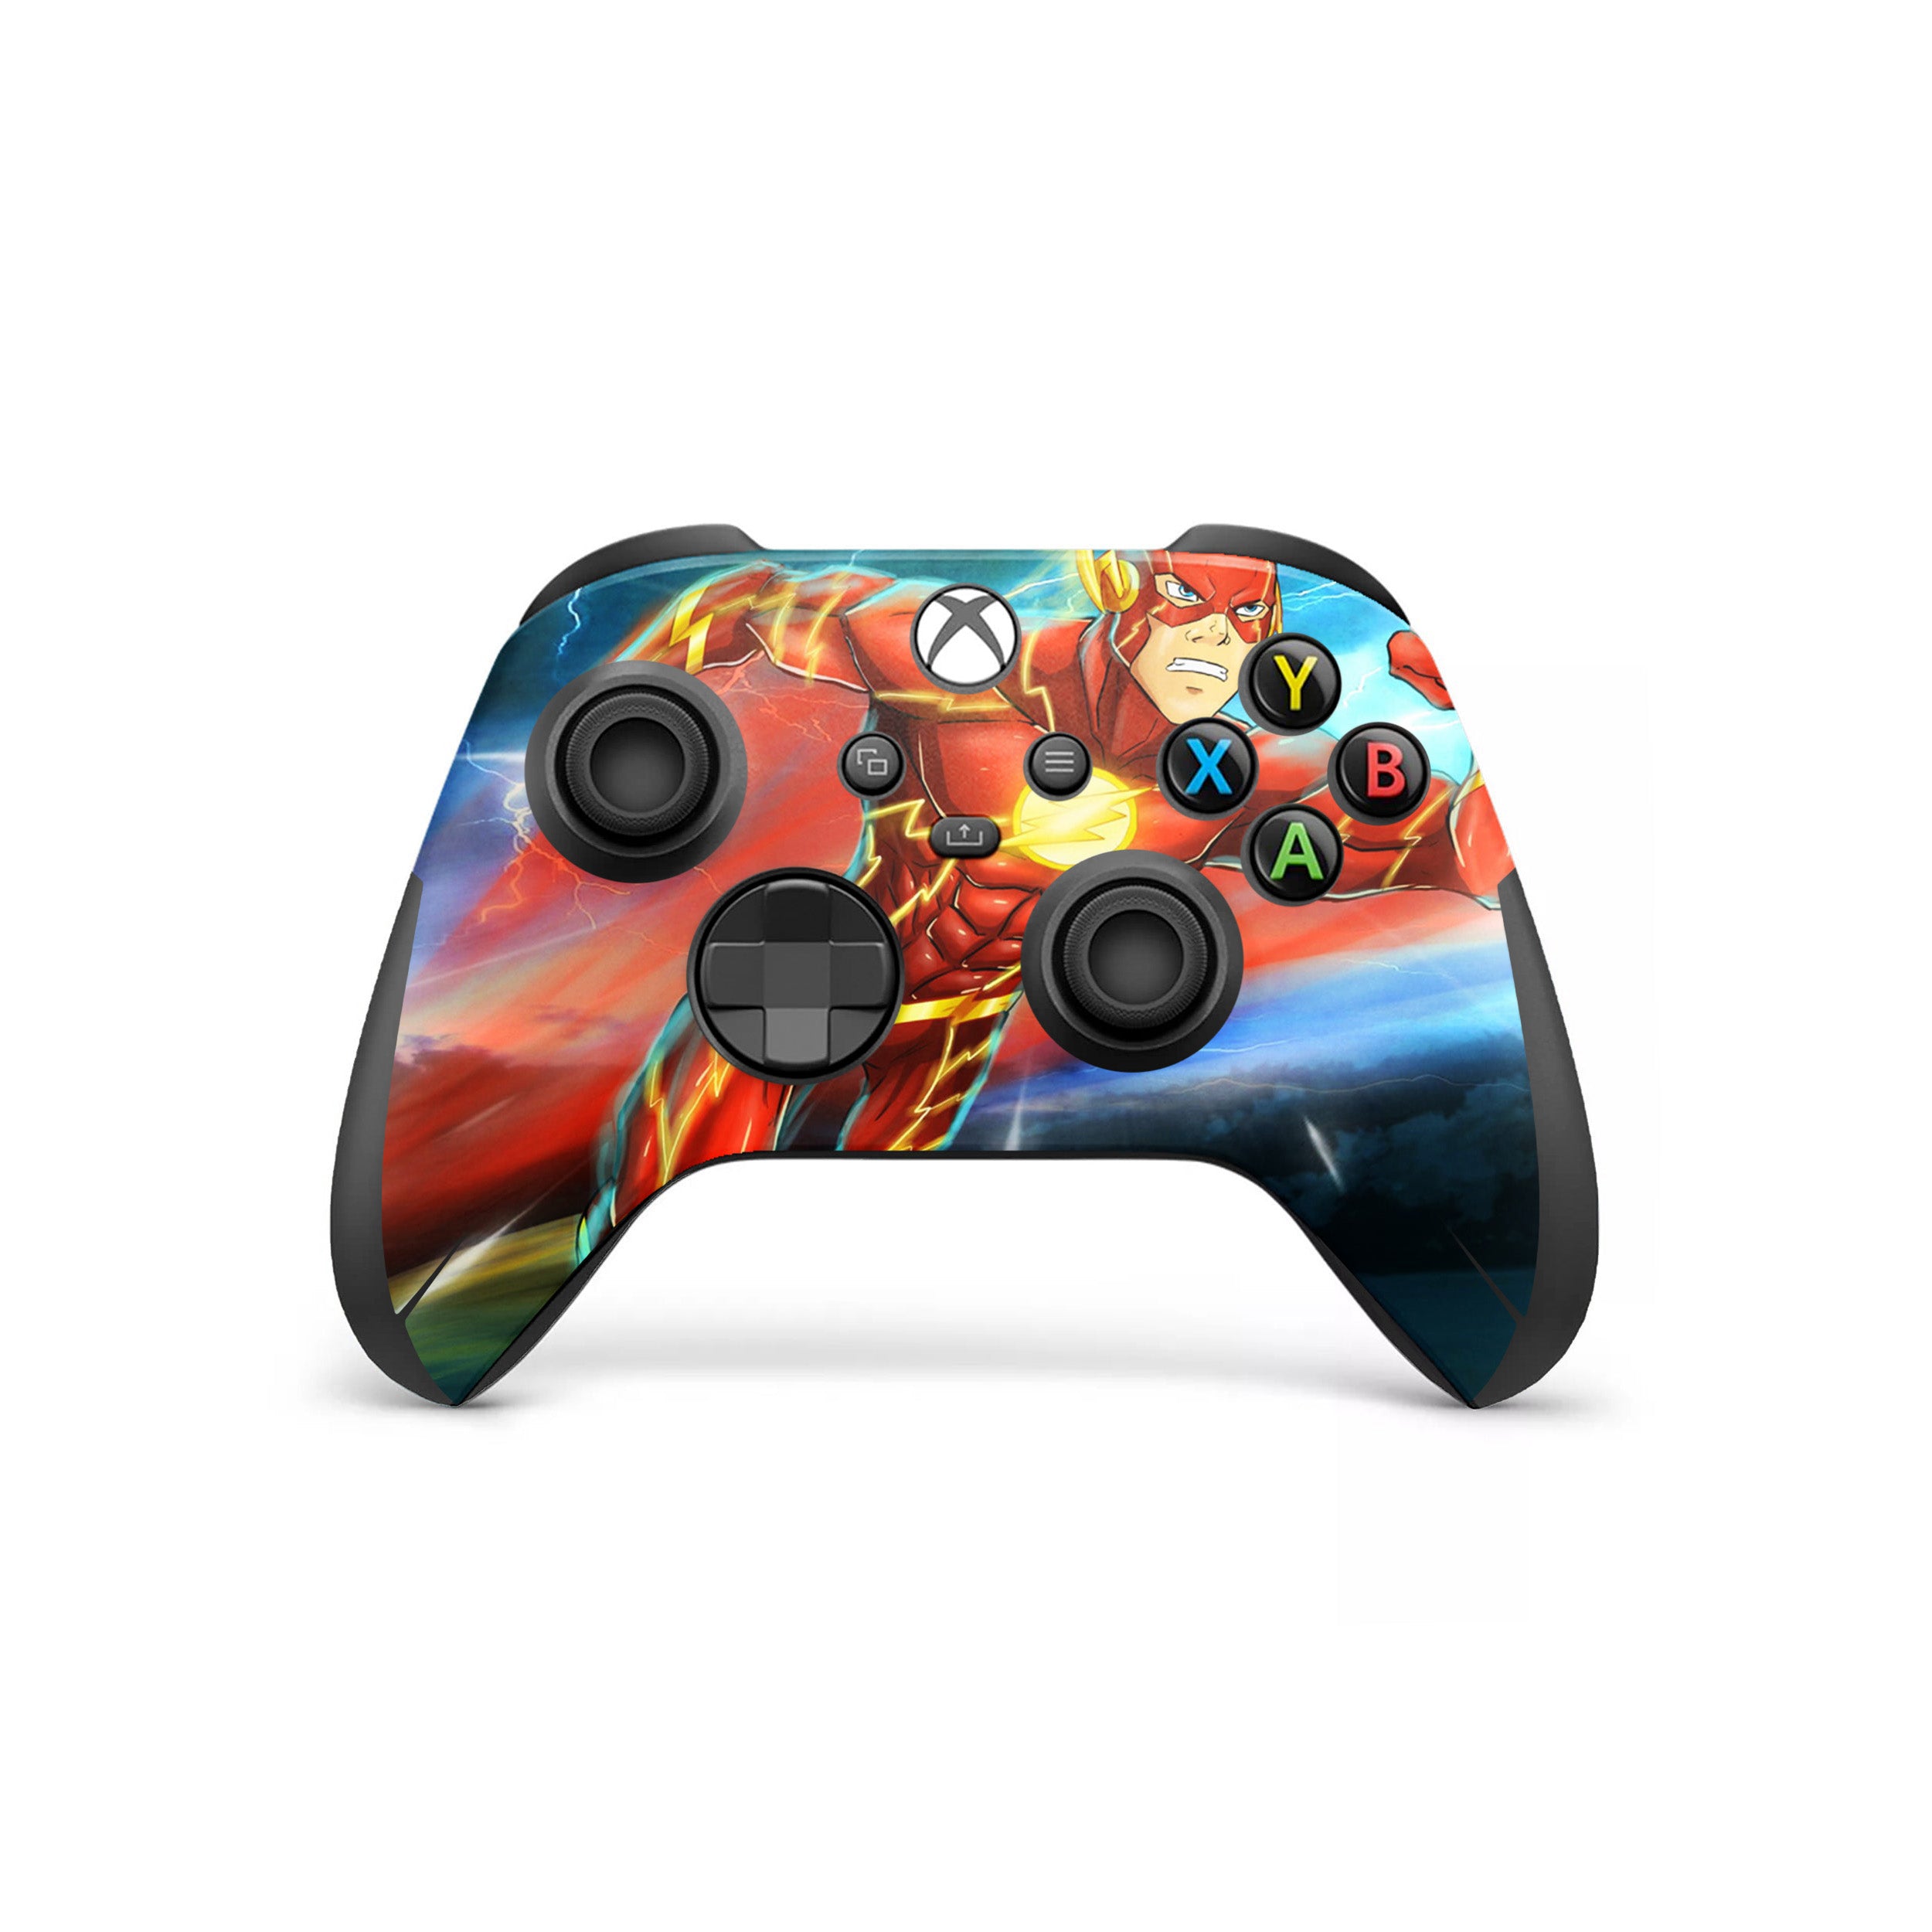 A video game skin featuring a Marvel Flash design for the Xbox Wireless Controller.